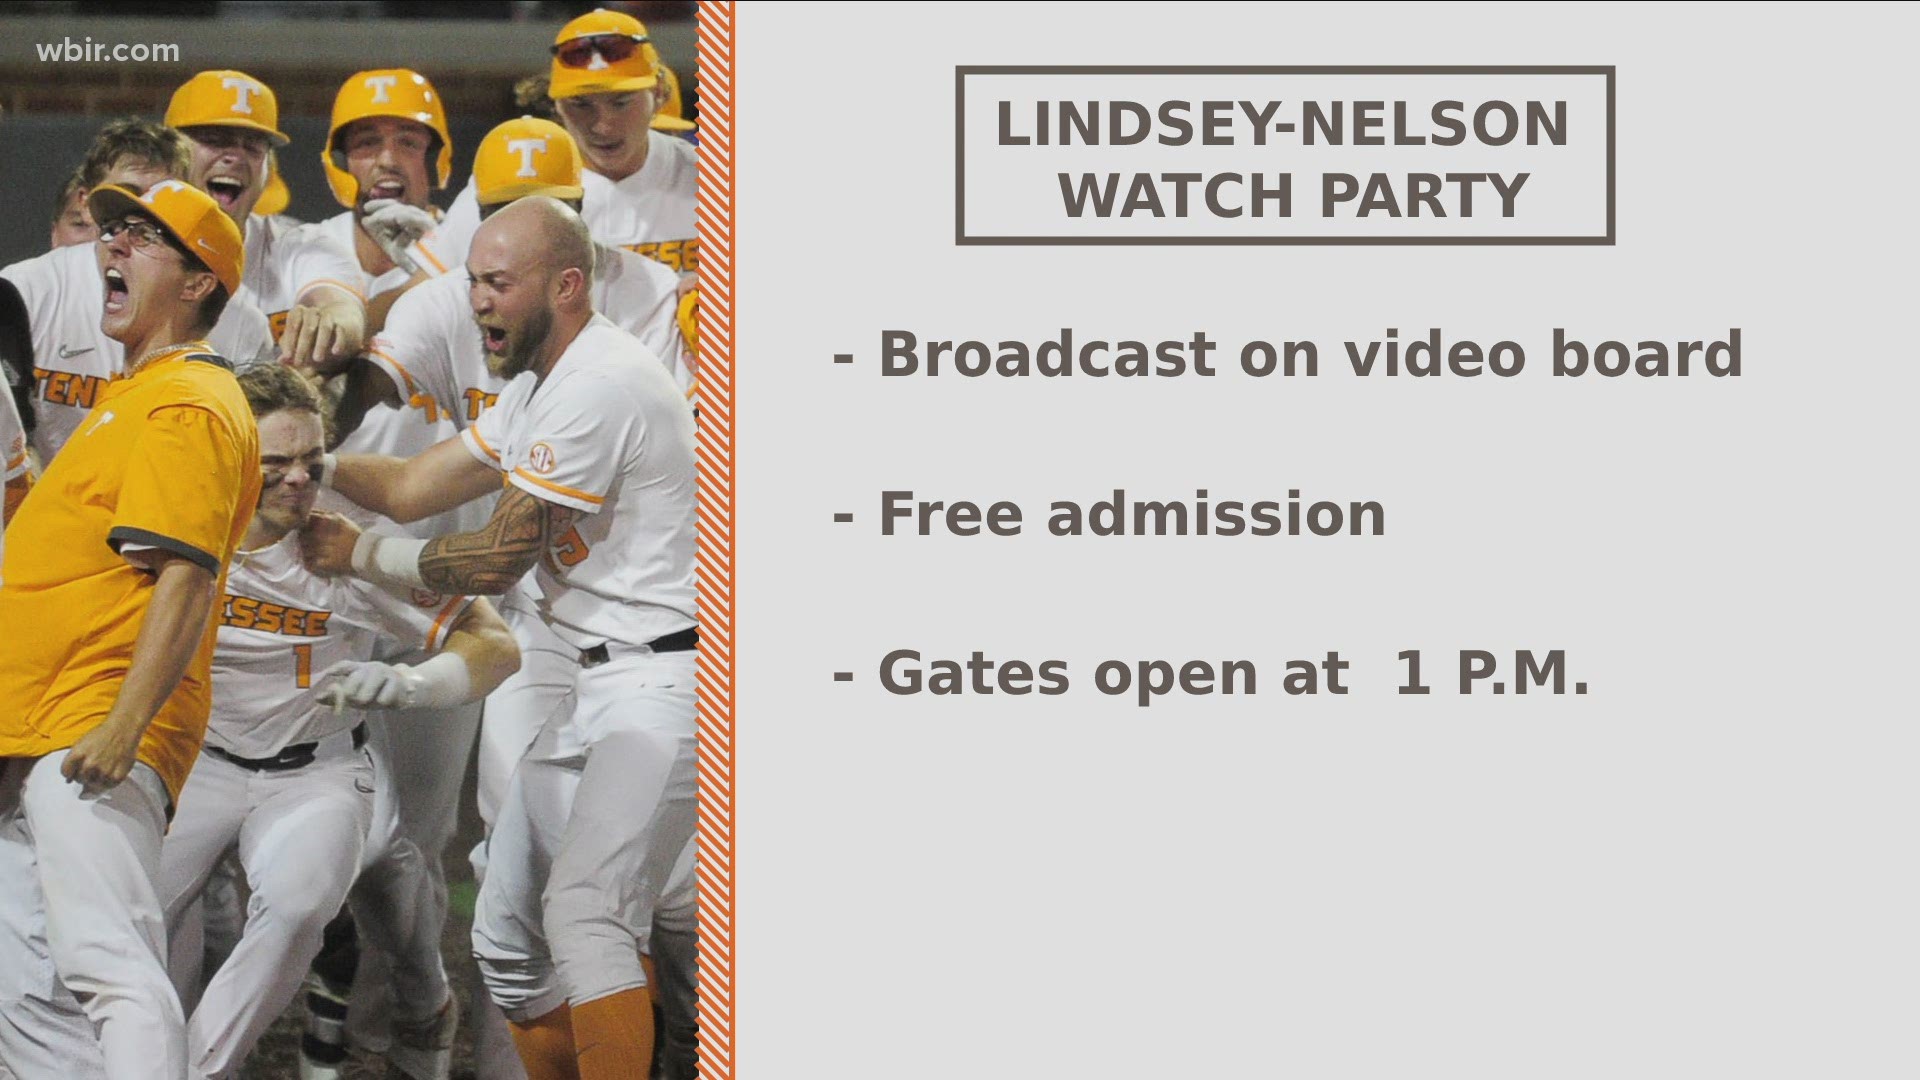 Vol fans invited by UT to Big Orange Watch Party this Sunday wbir